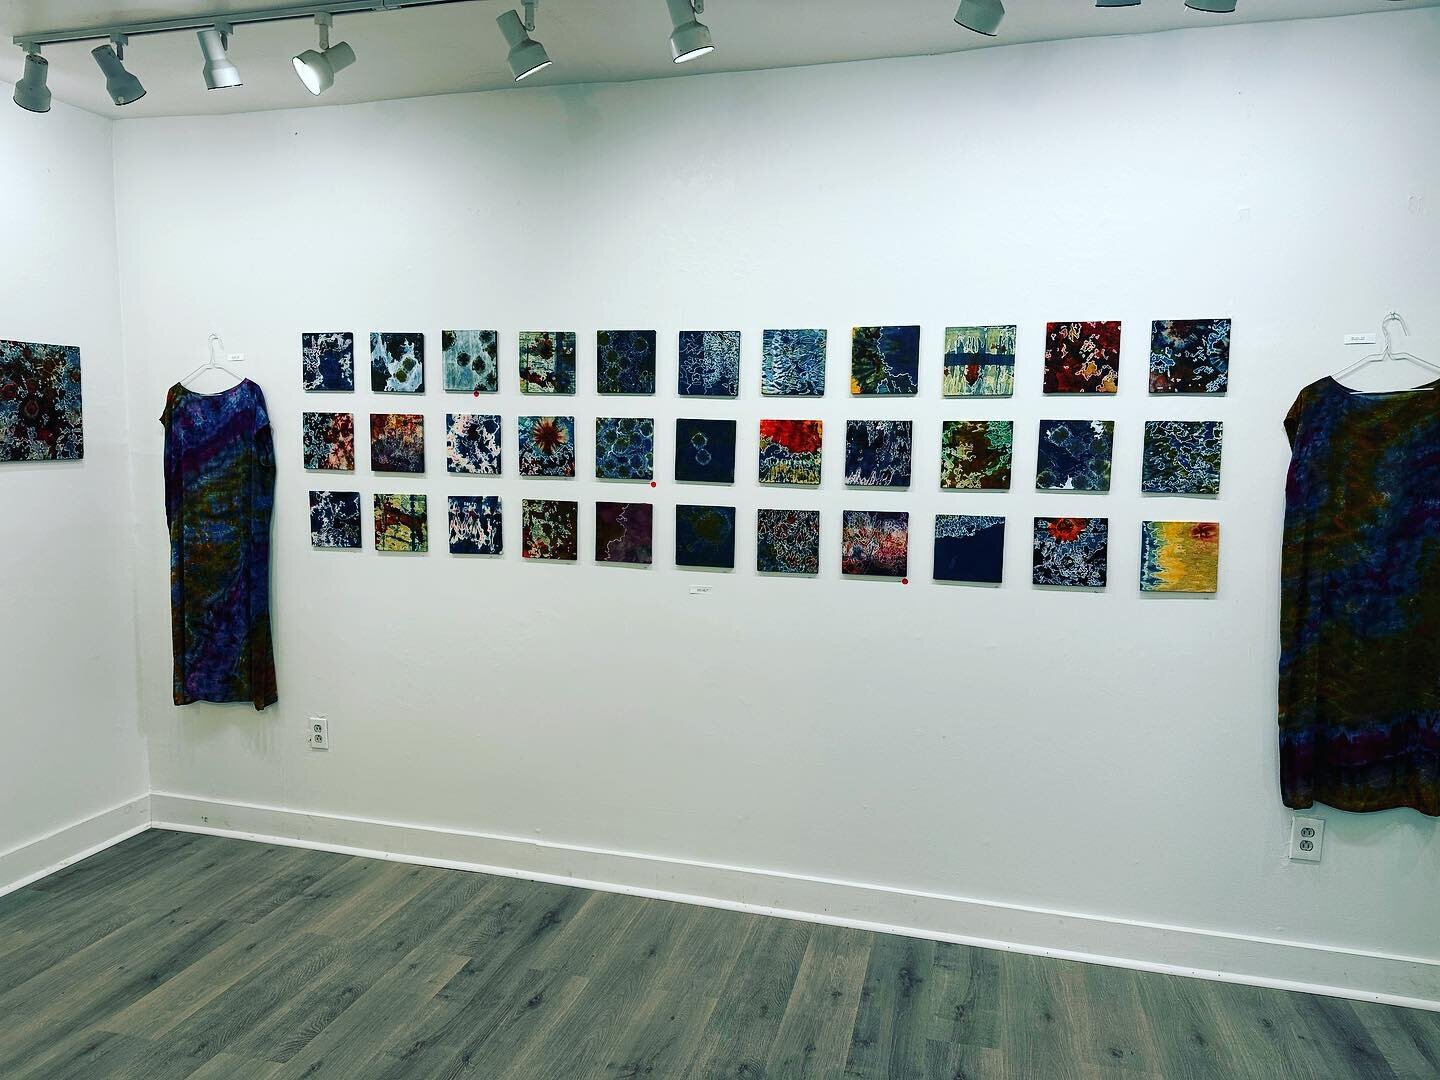 Come celebrate Elizabeth Doherty&rsquo;s beautiful new work tonight at Spring Street Gallery, 5-7 pm. Even though Water St is still closed you can take Chapel St and Weldon&rsquo;s way to get here! #blockislandartist #blockislandgallery #springstreet